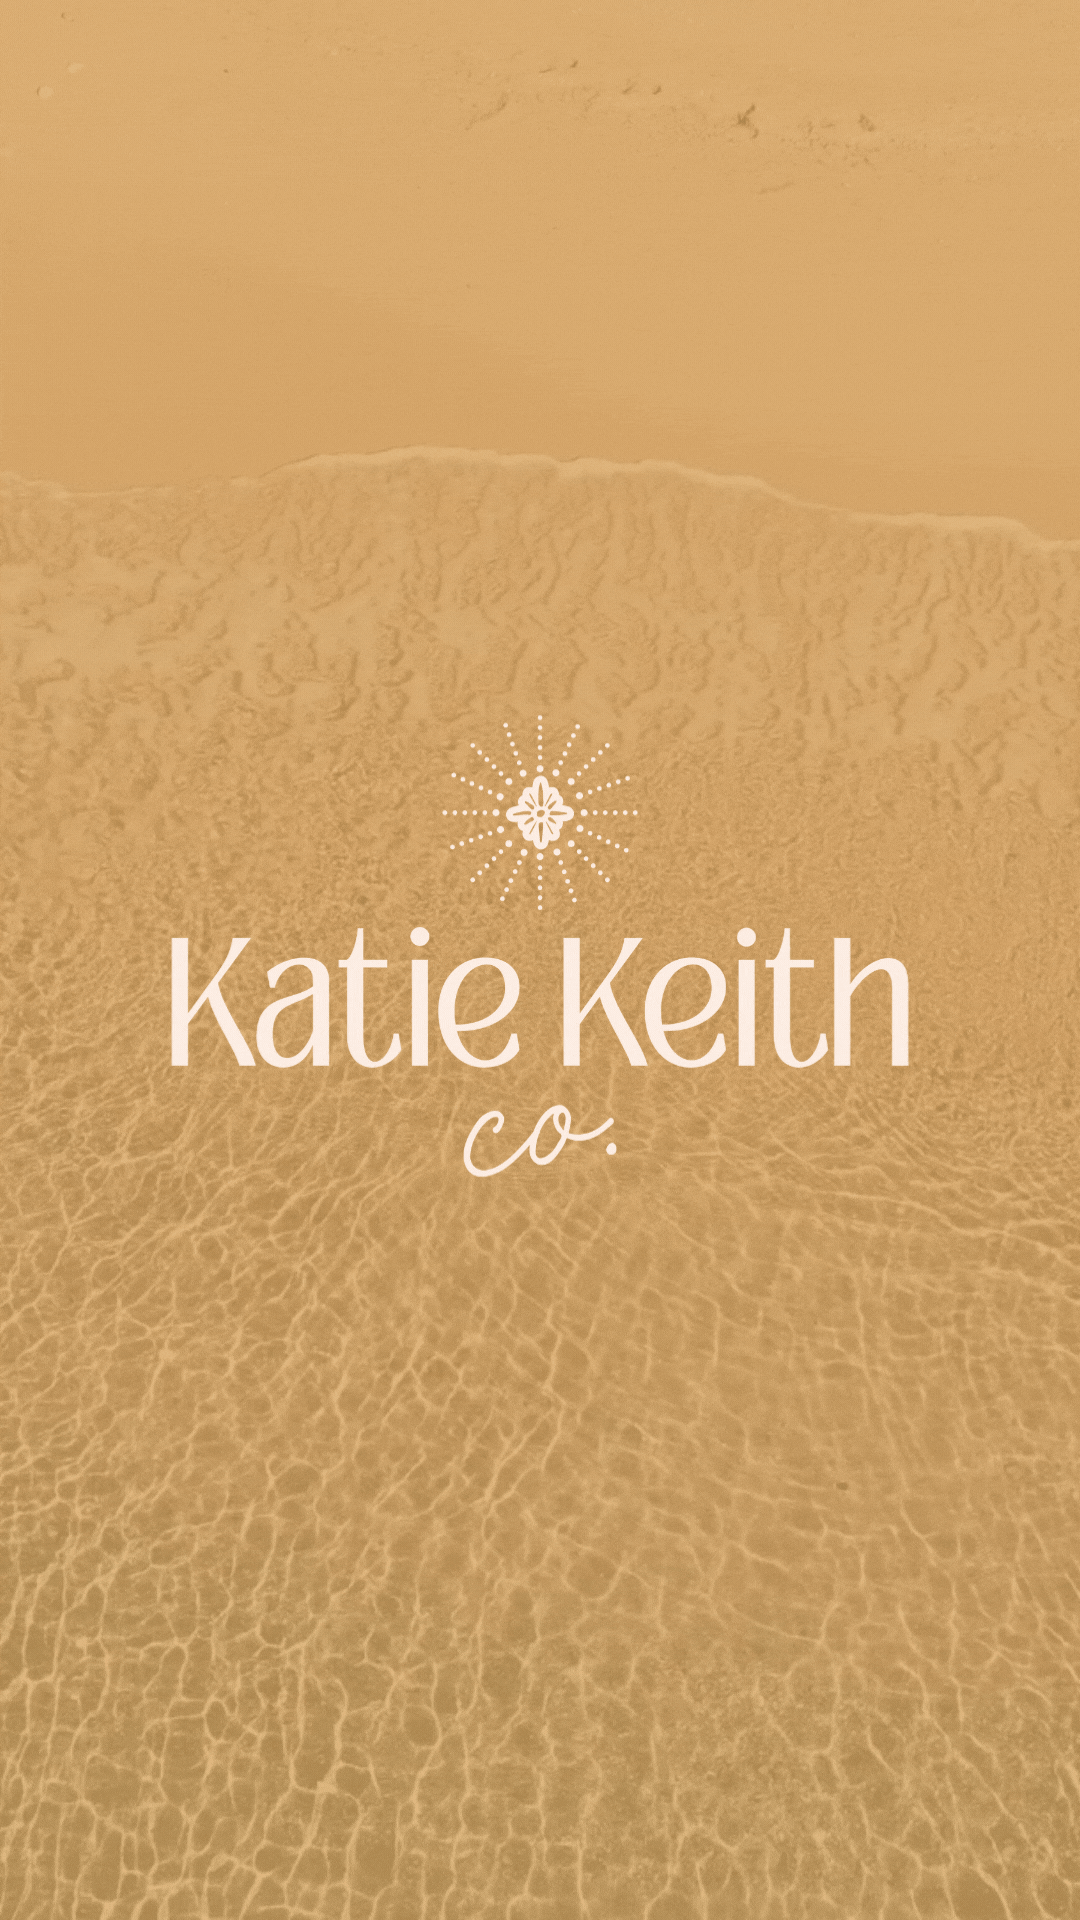 Katie Keith Co. logo on yellow background with water